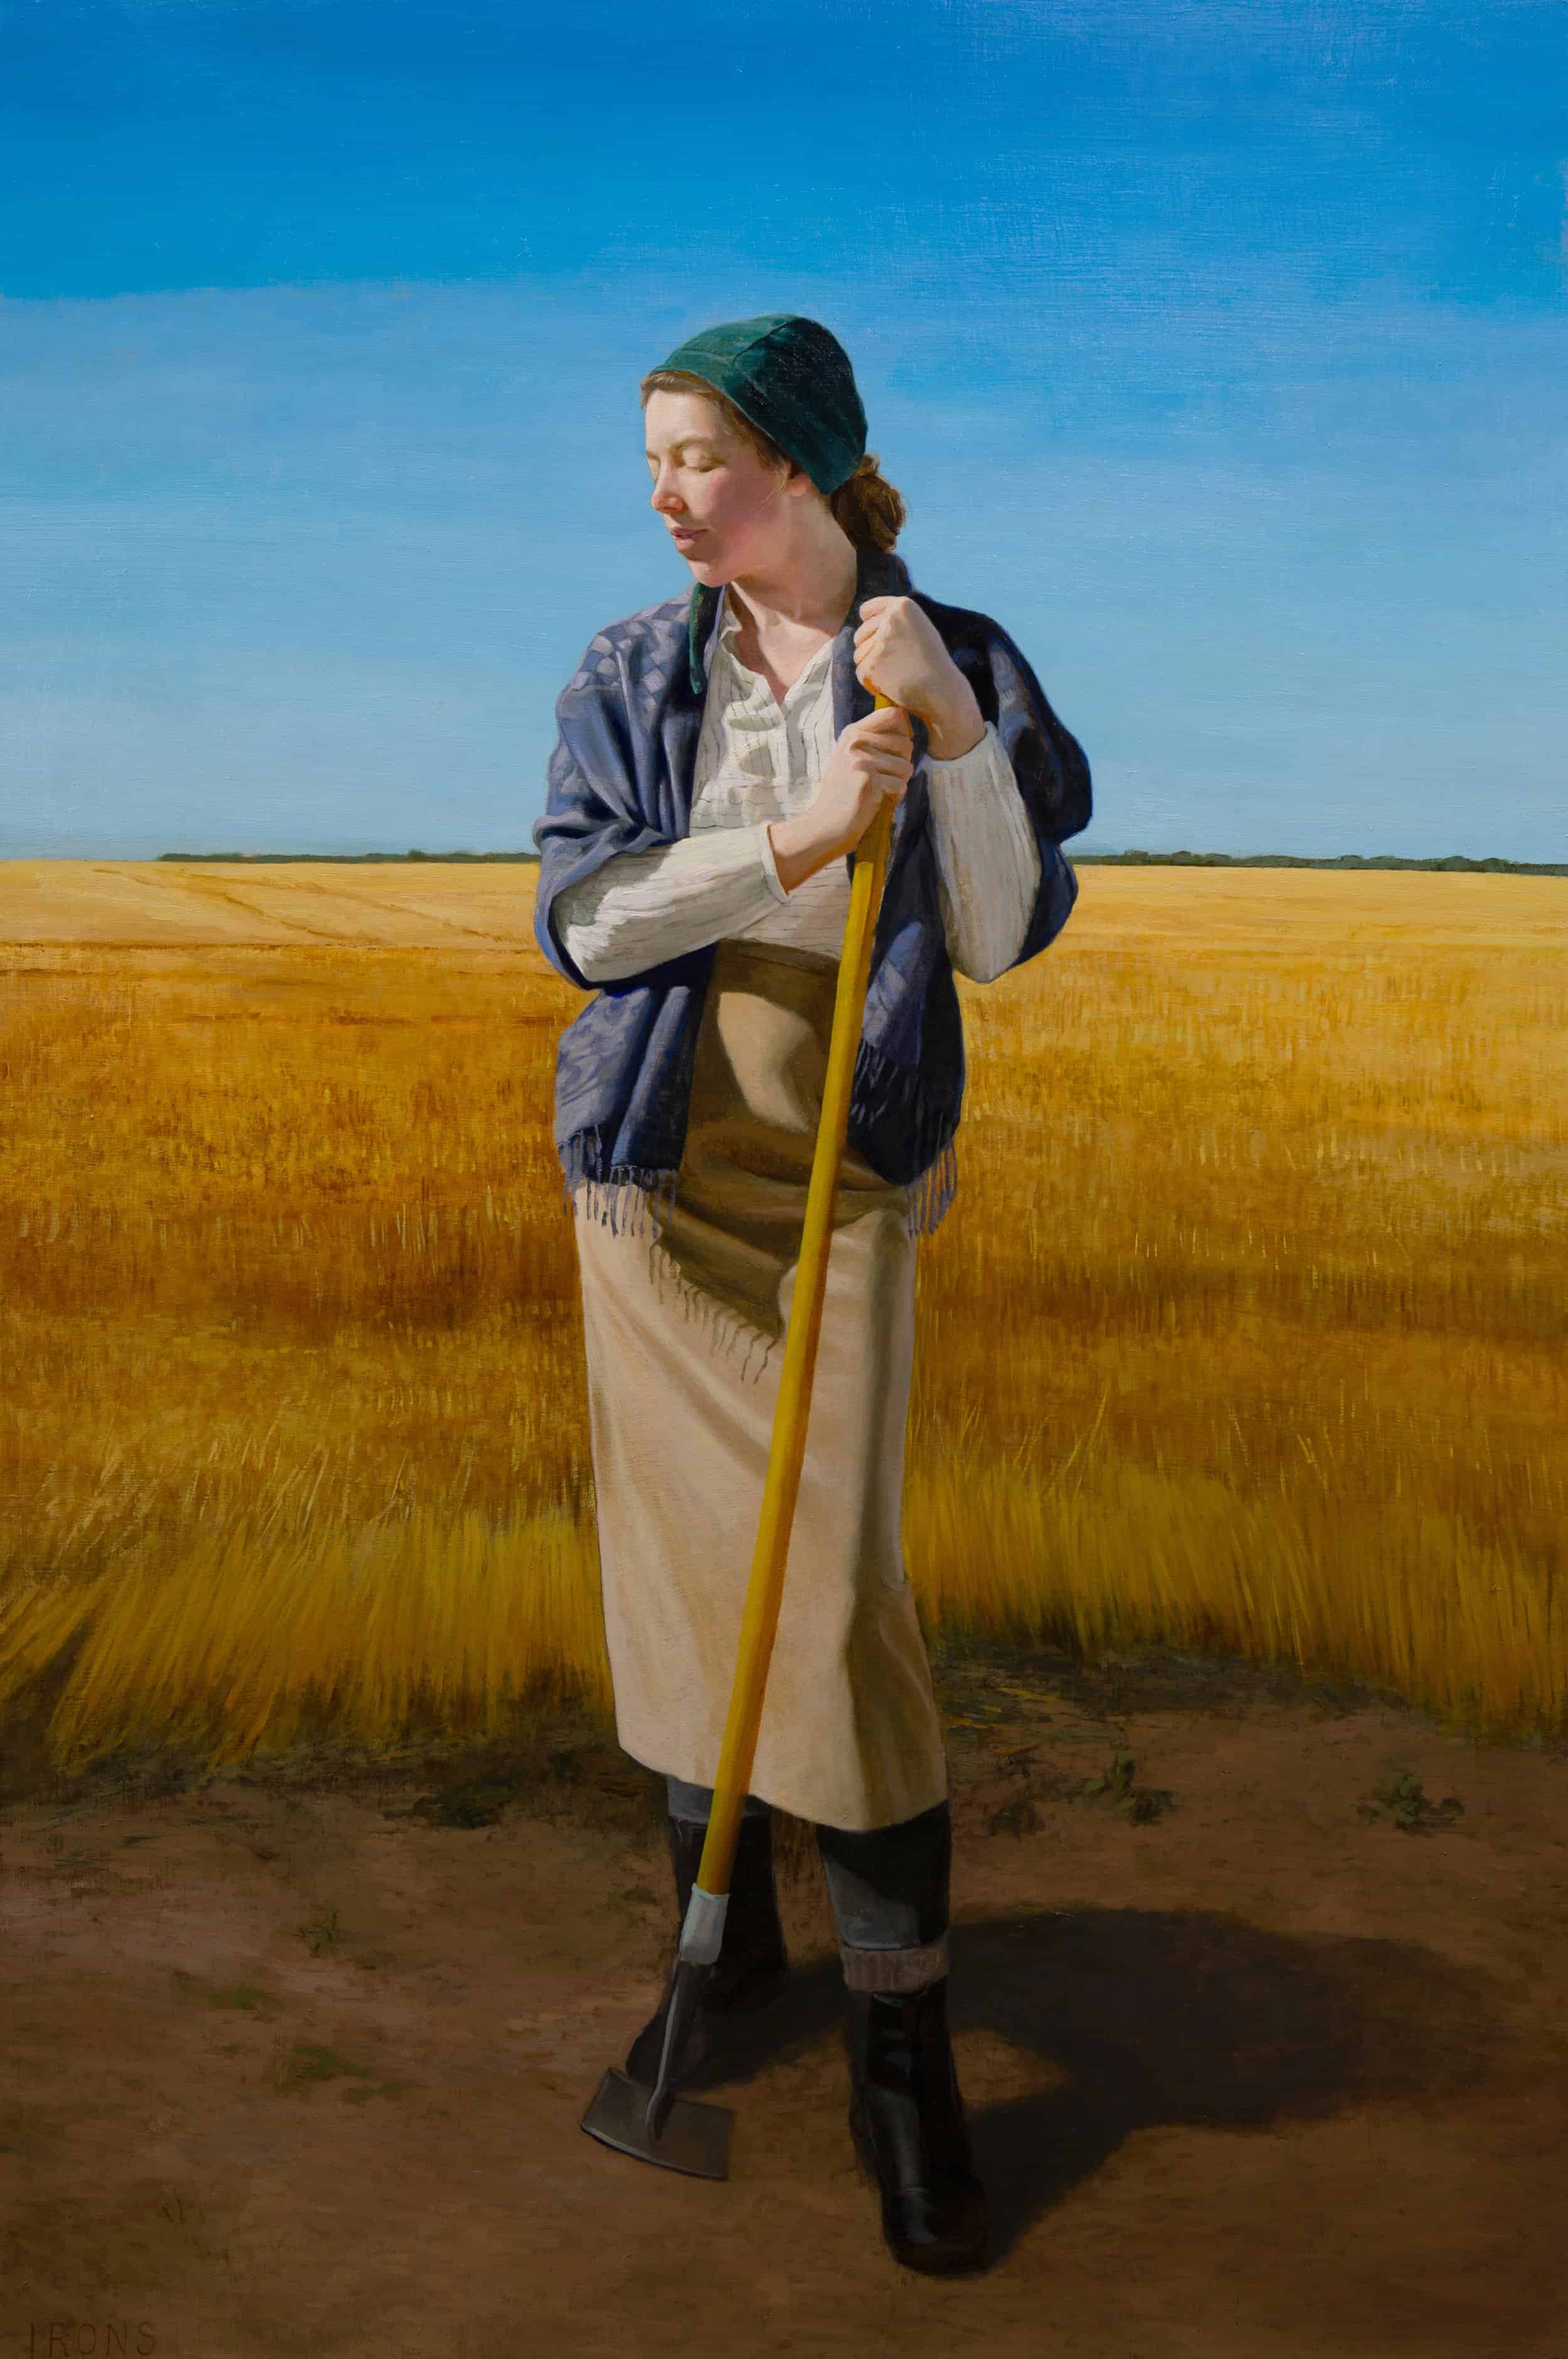 Woman stands in field and rests on hoe